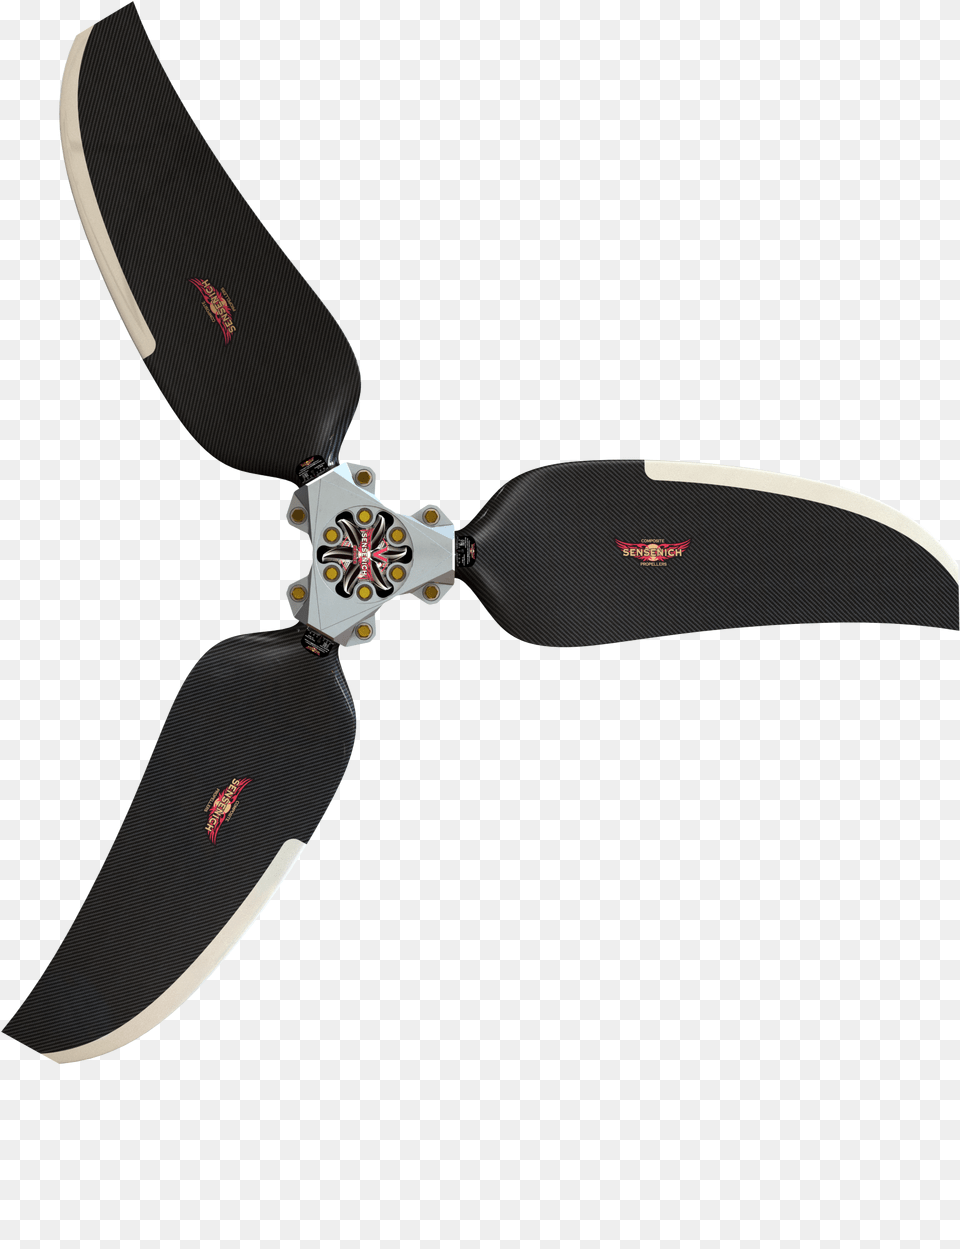 Jw Series Propeller Propeller Blade, Appliance, Ceiling Fan, Device, Electrical Device Png Image